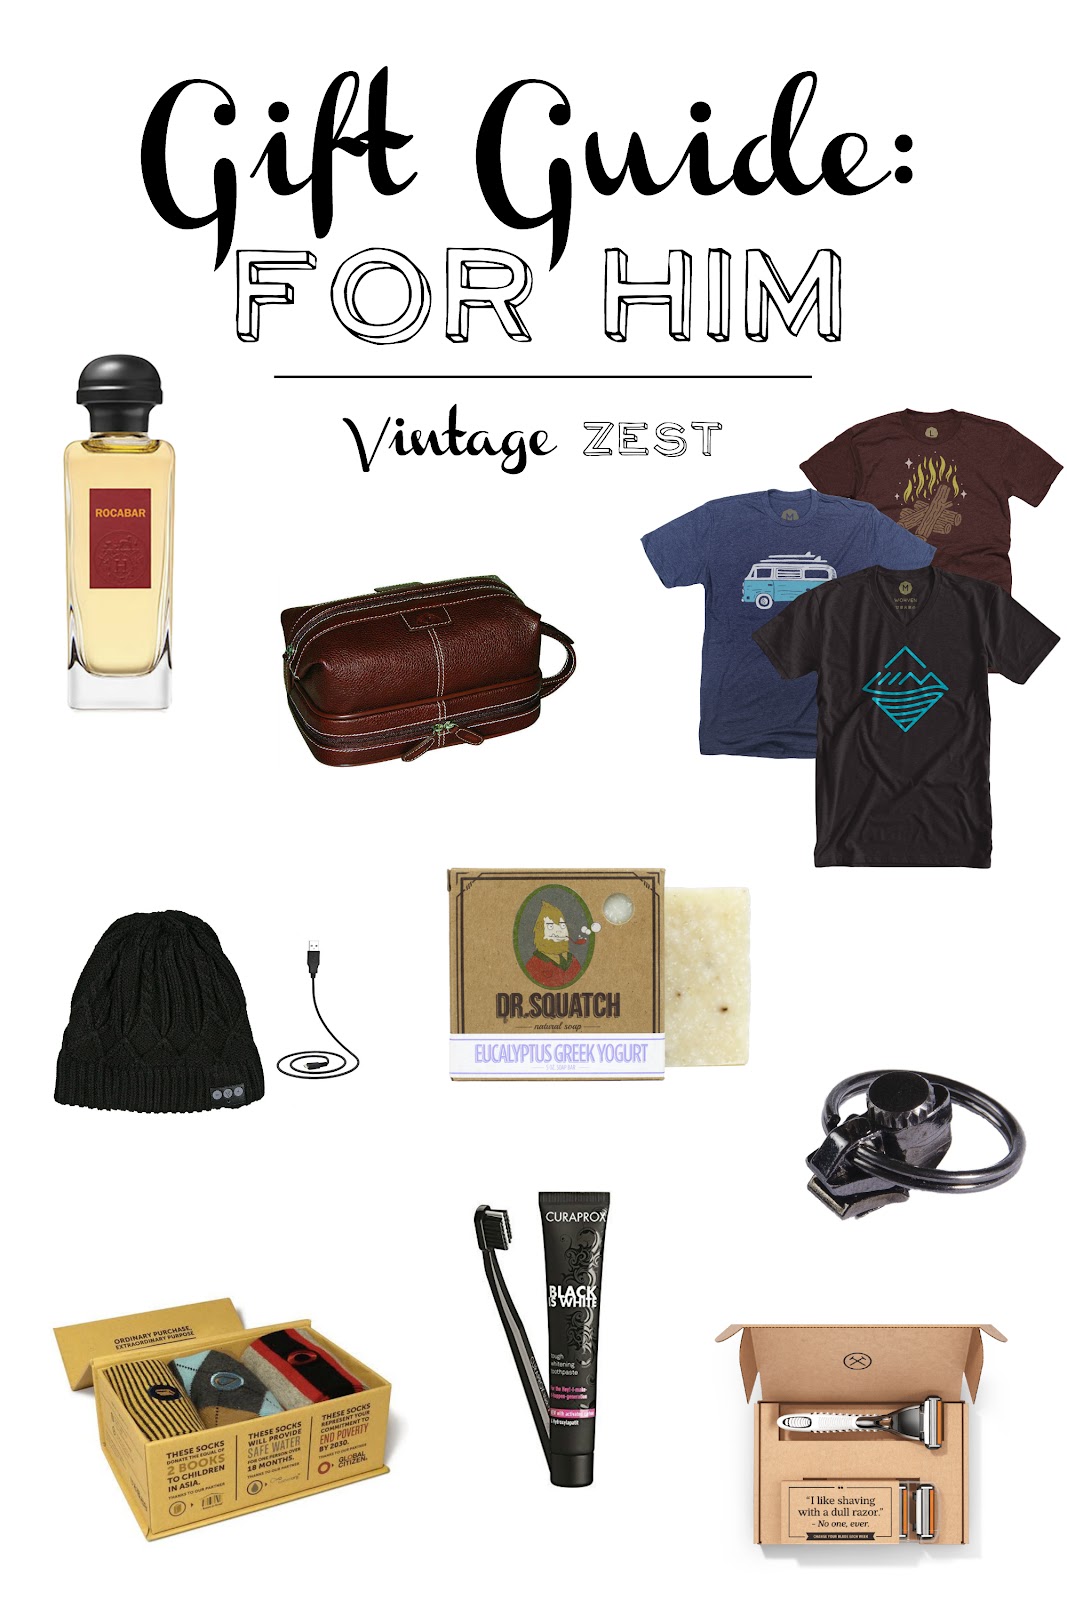 Gift Guide for Him on Diane's Vintage Zest! #giftguide #holiday #shopping #presents #gifts #men